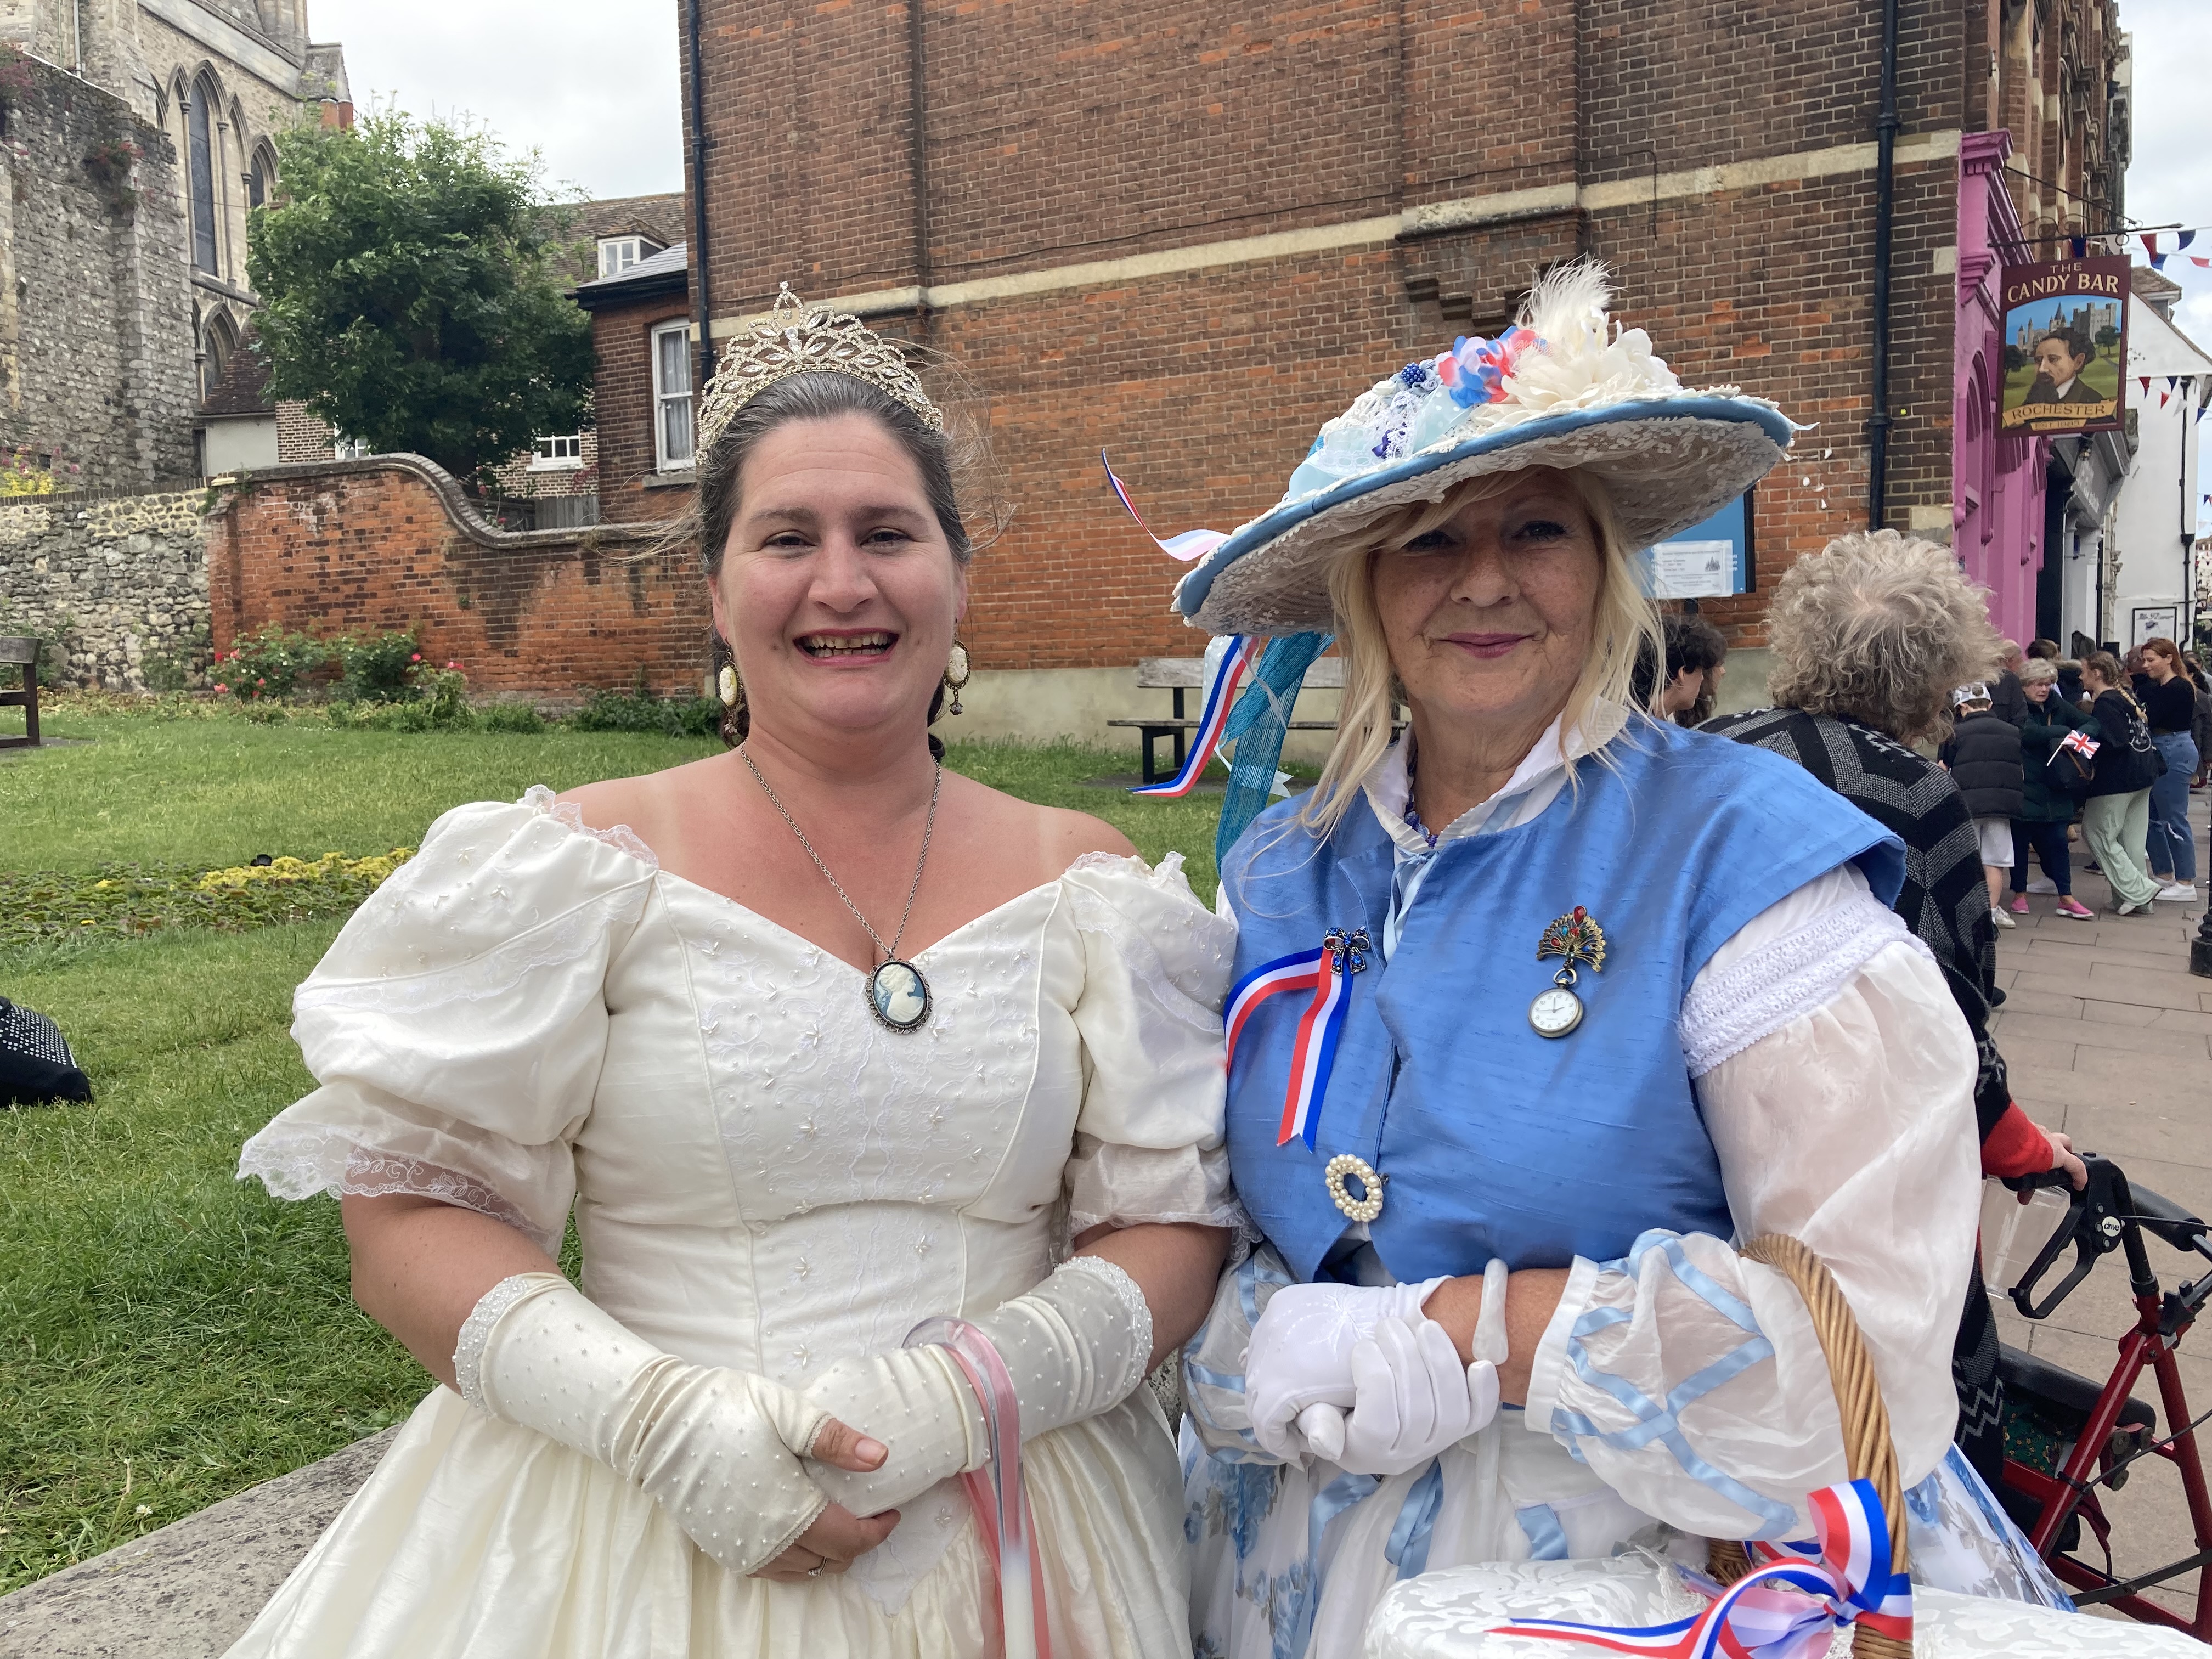 Rebecca Chorley and Sue Smyth in Dickens period dress at the Rochester Dickens Festival marking the Platinum Jubilee on June 4, 2022